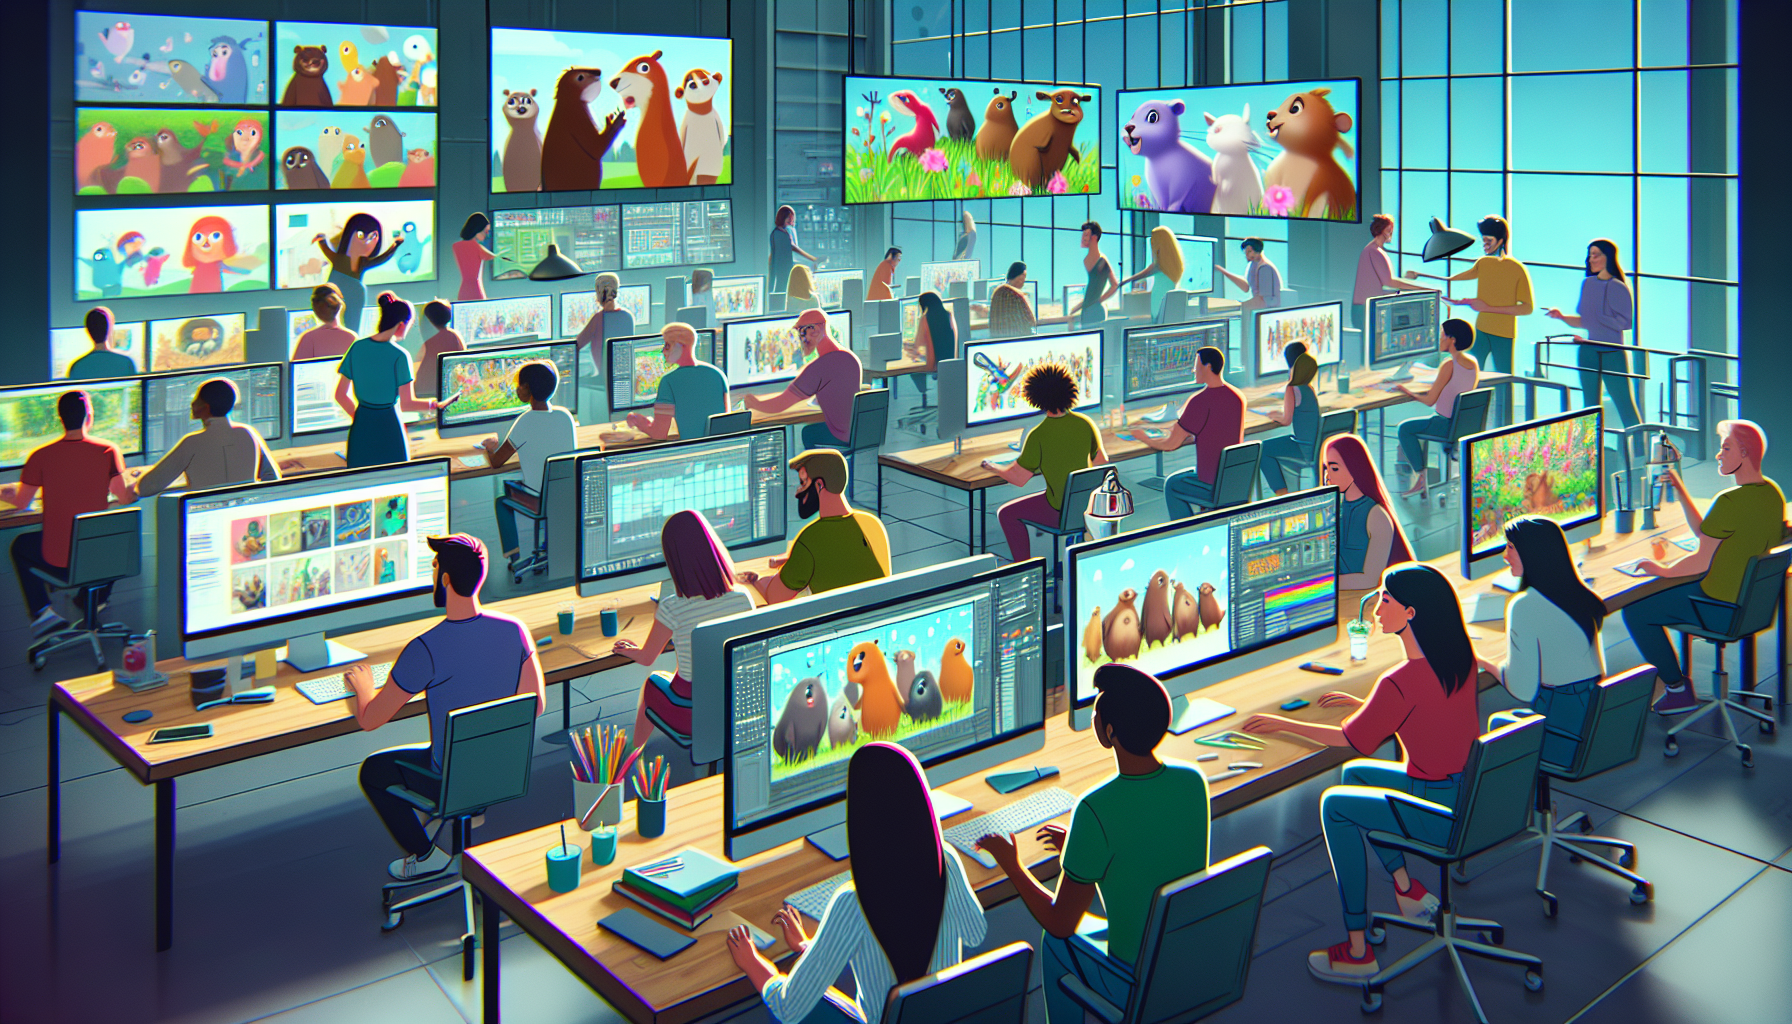 Digital artists working on high-tech computers to create a polished visual look for an animated film featuring hundreds of cartoon beavers, using Adobe After Effects in a modern animation studio setti